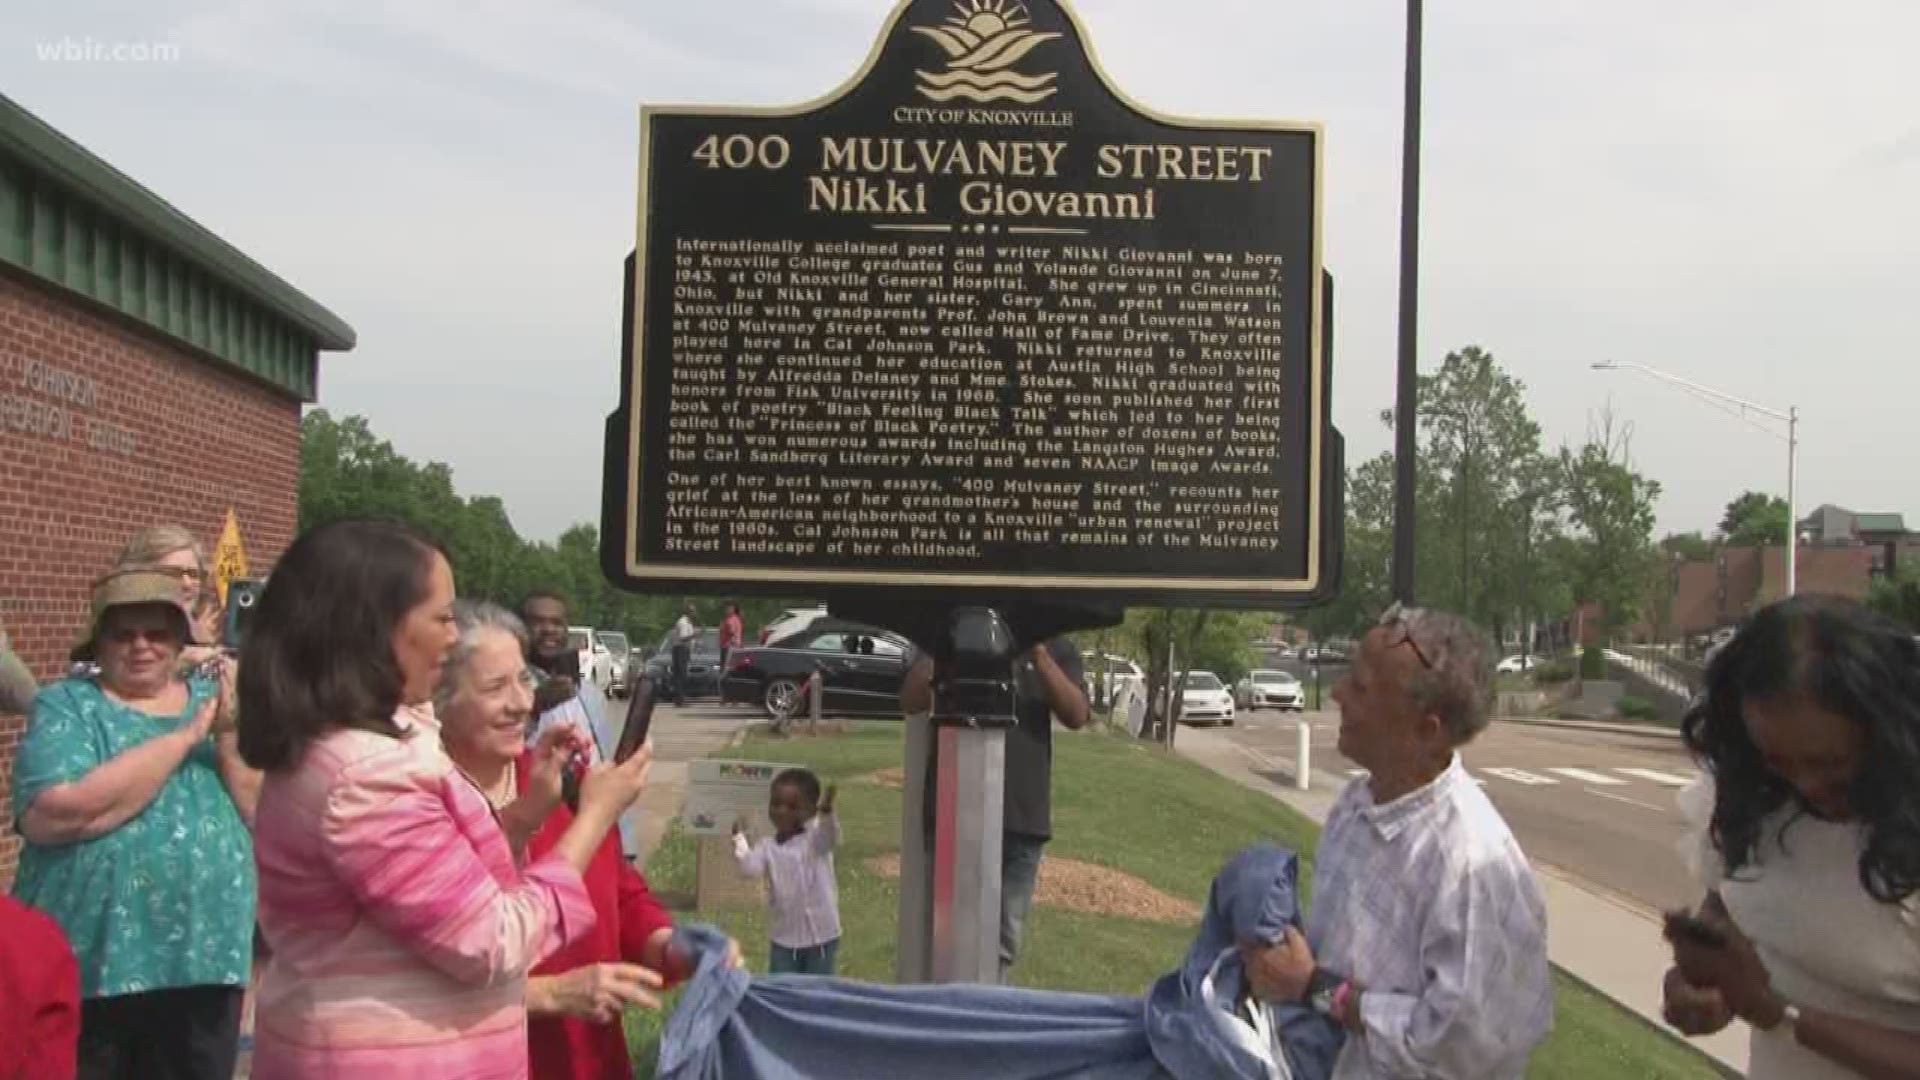 The city of Knoxville unveils a new plaque honoring Knoxville-native and American Poet Nikki Giovanni near the house where she spent summers with her grandparents. May 23, 2019-4pm.